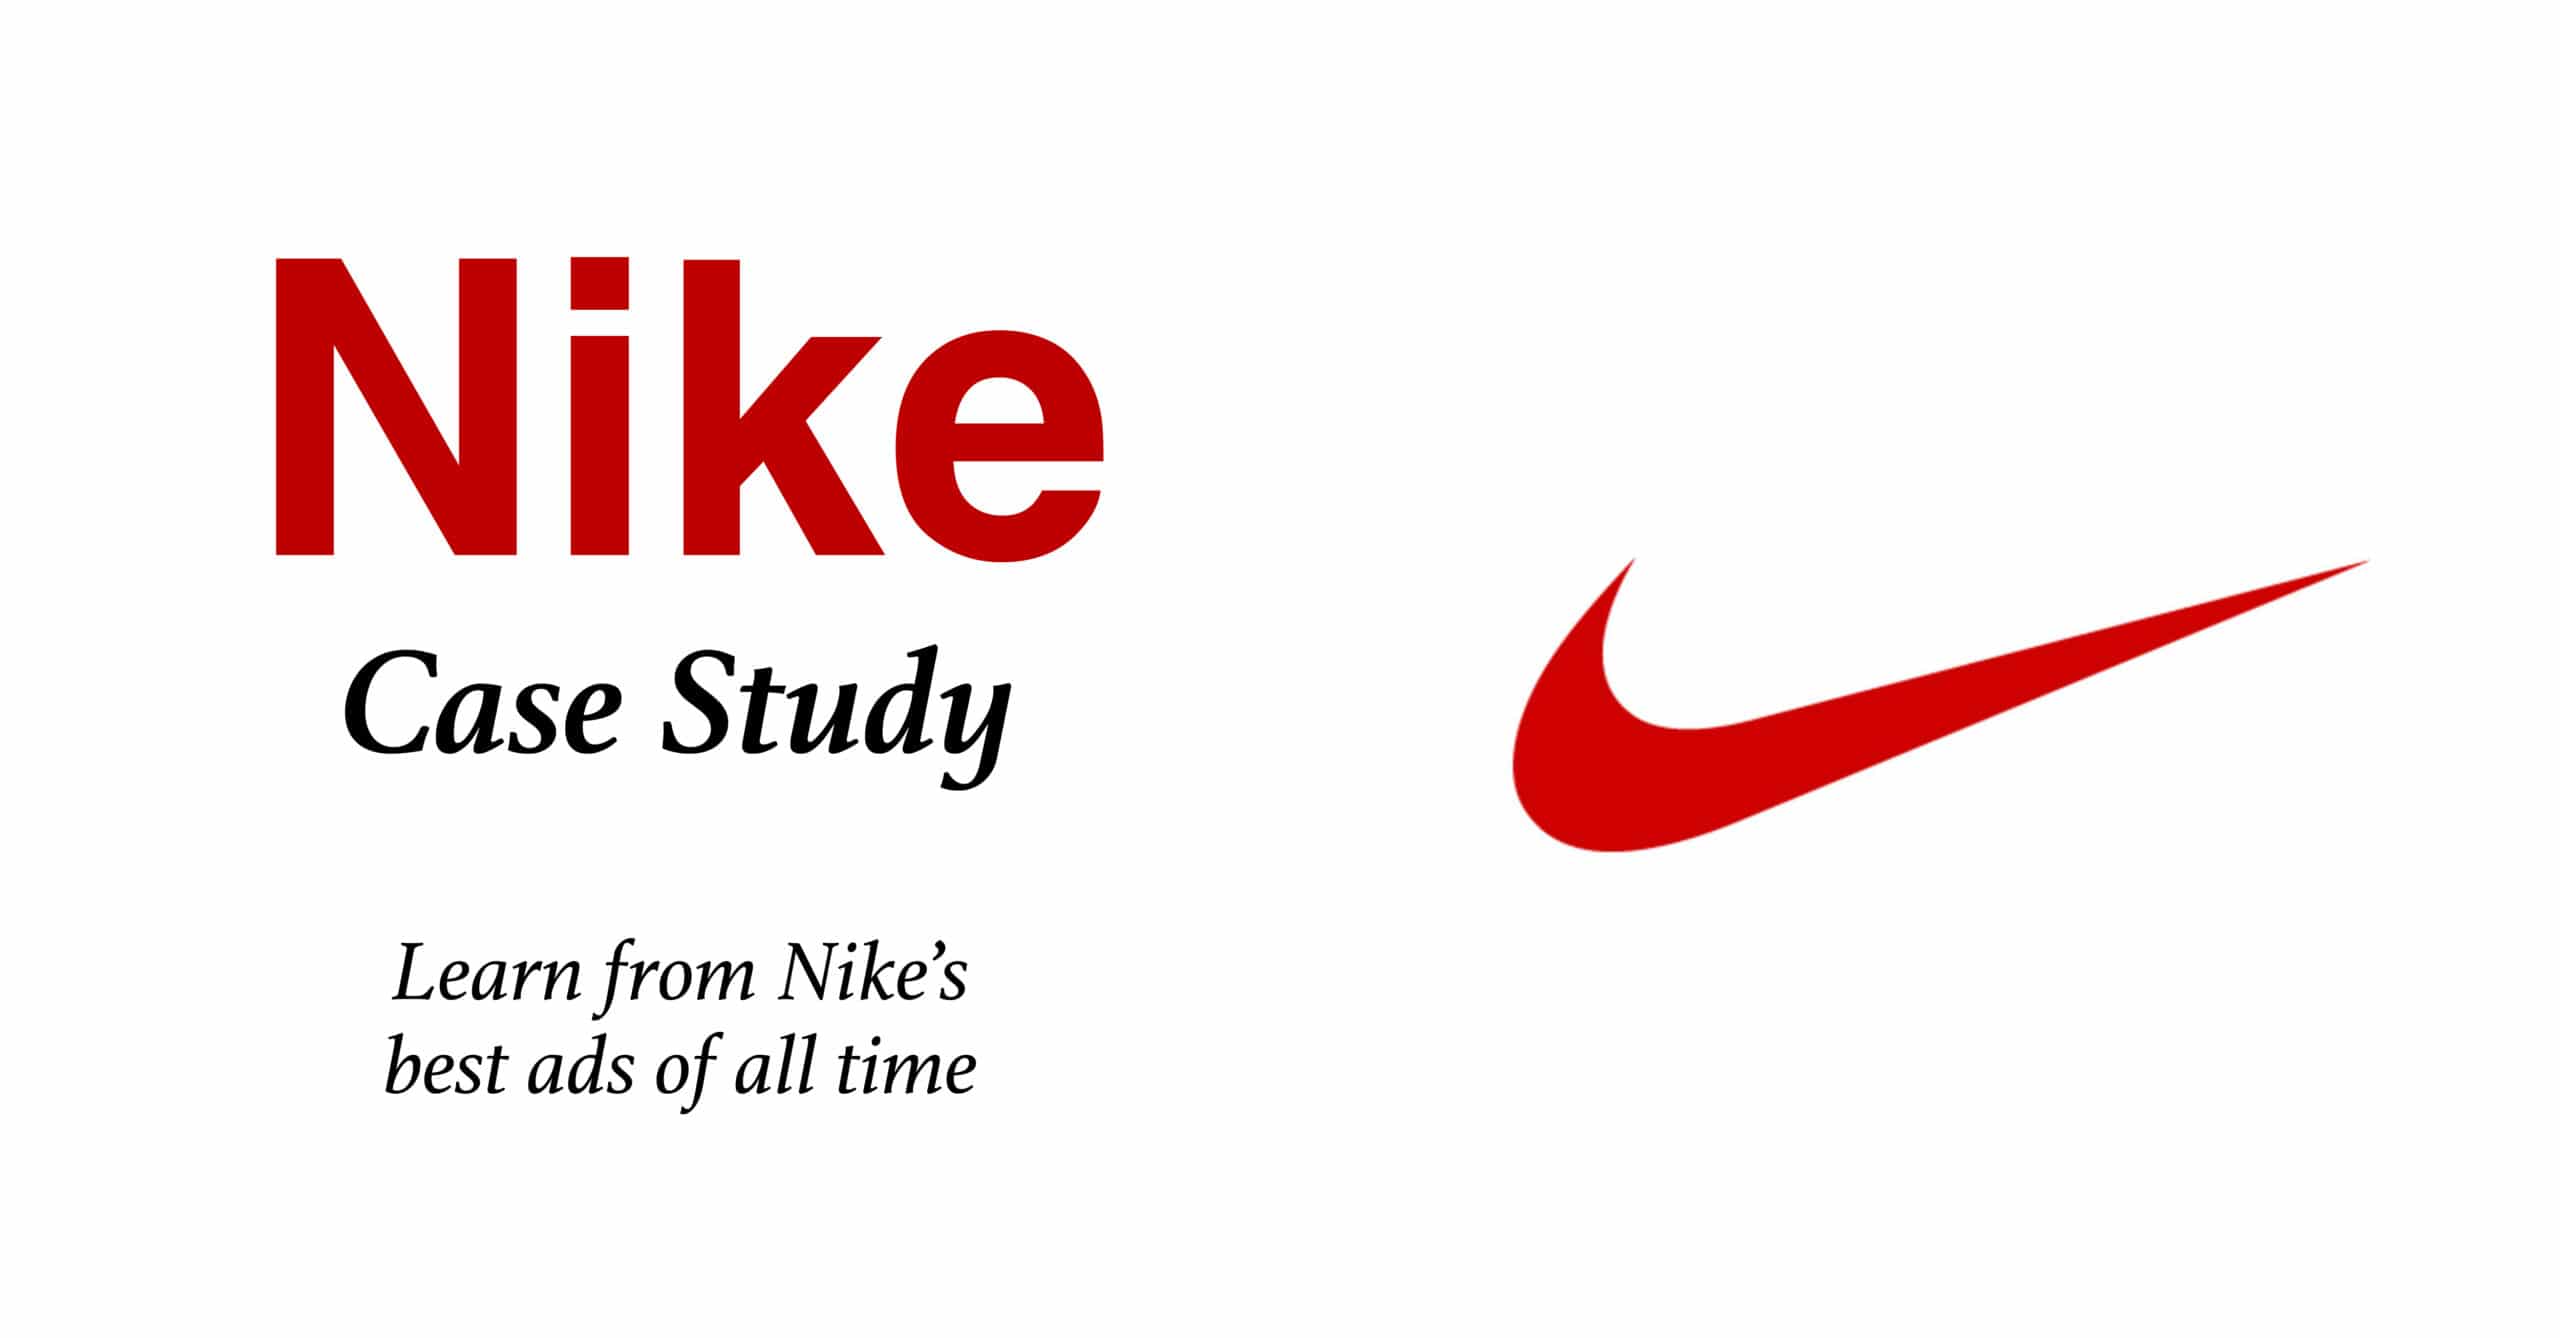 Robar a desagradable eficientemente Nike case study: Get inspired by the best Nike ads of all time